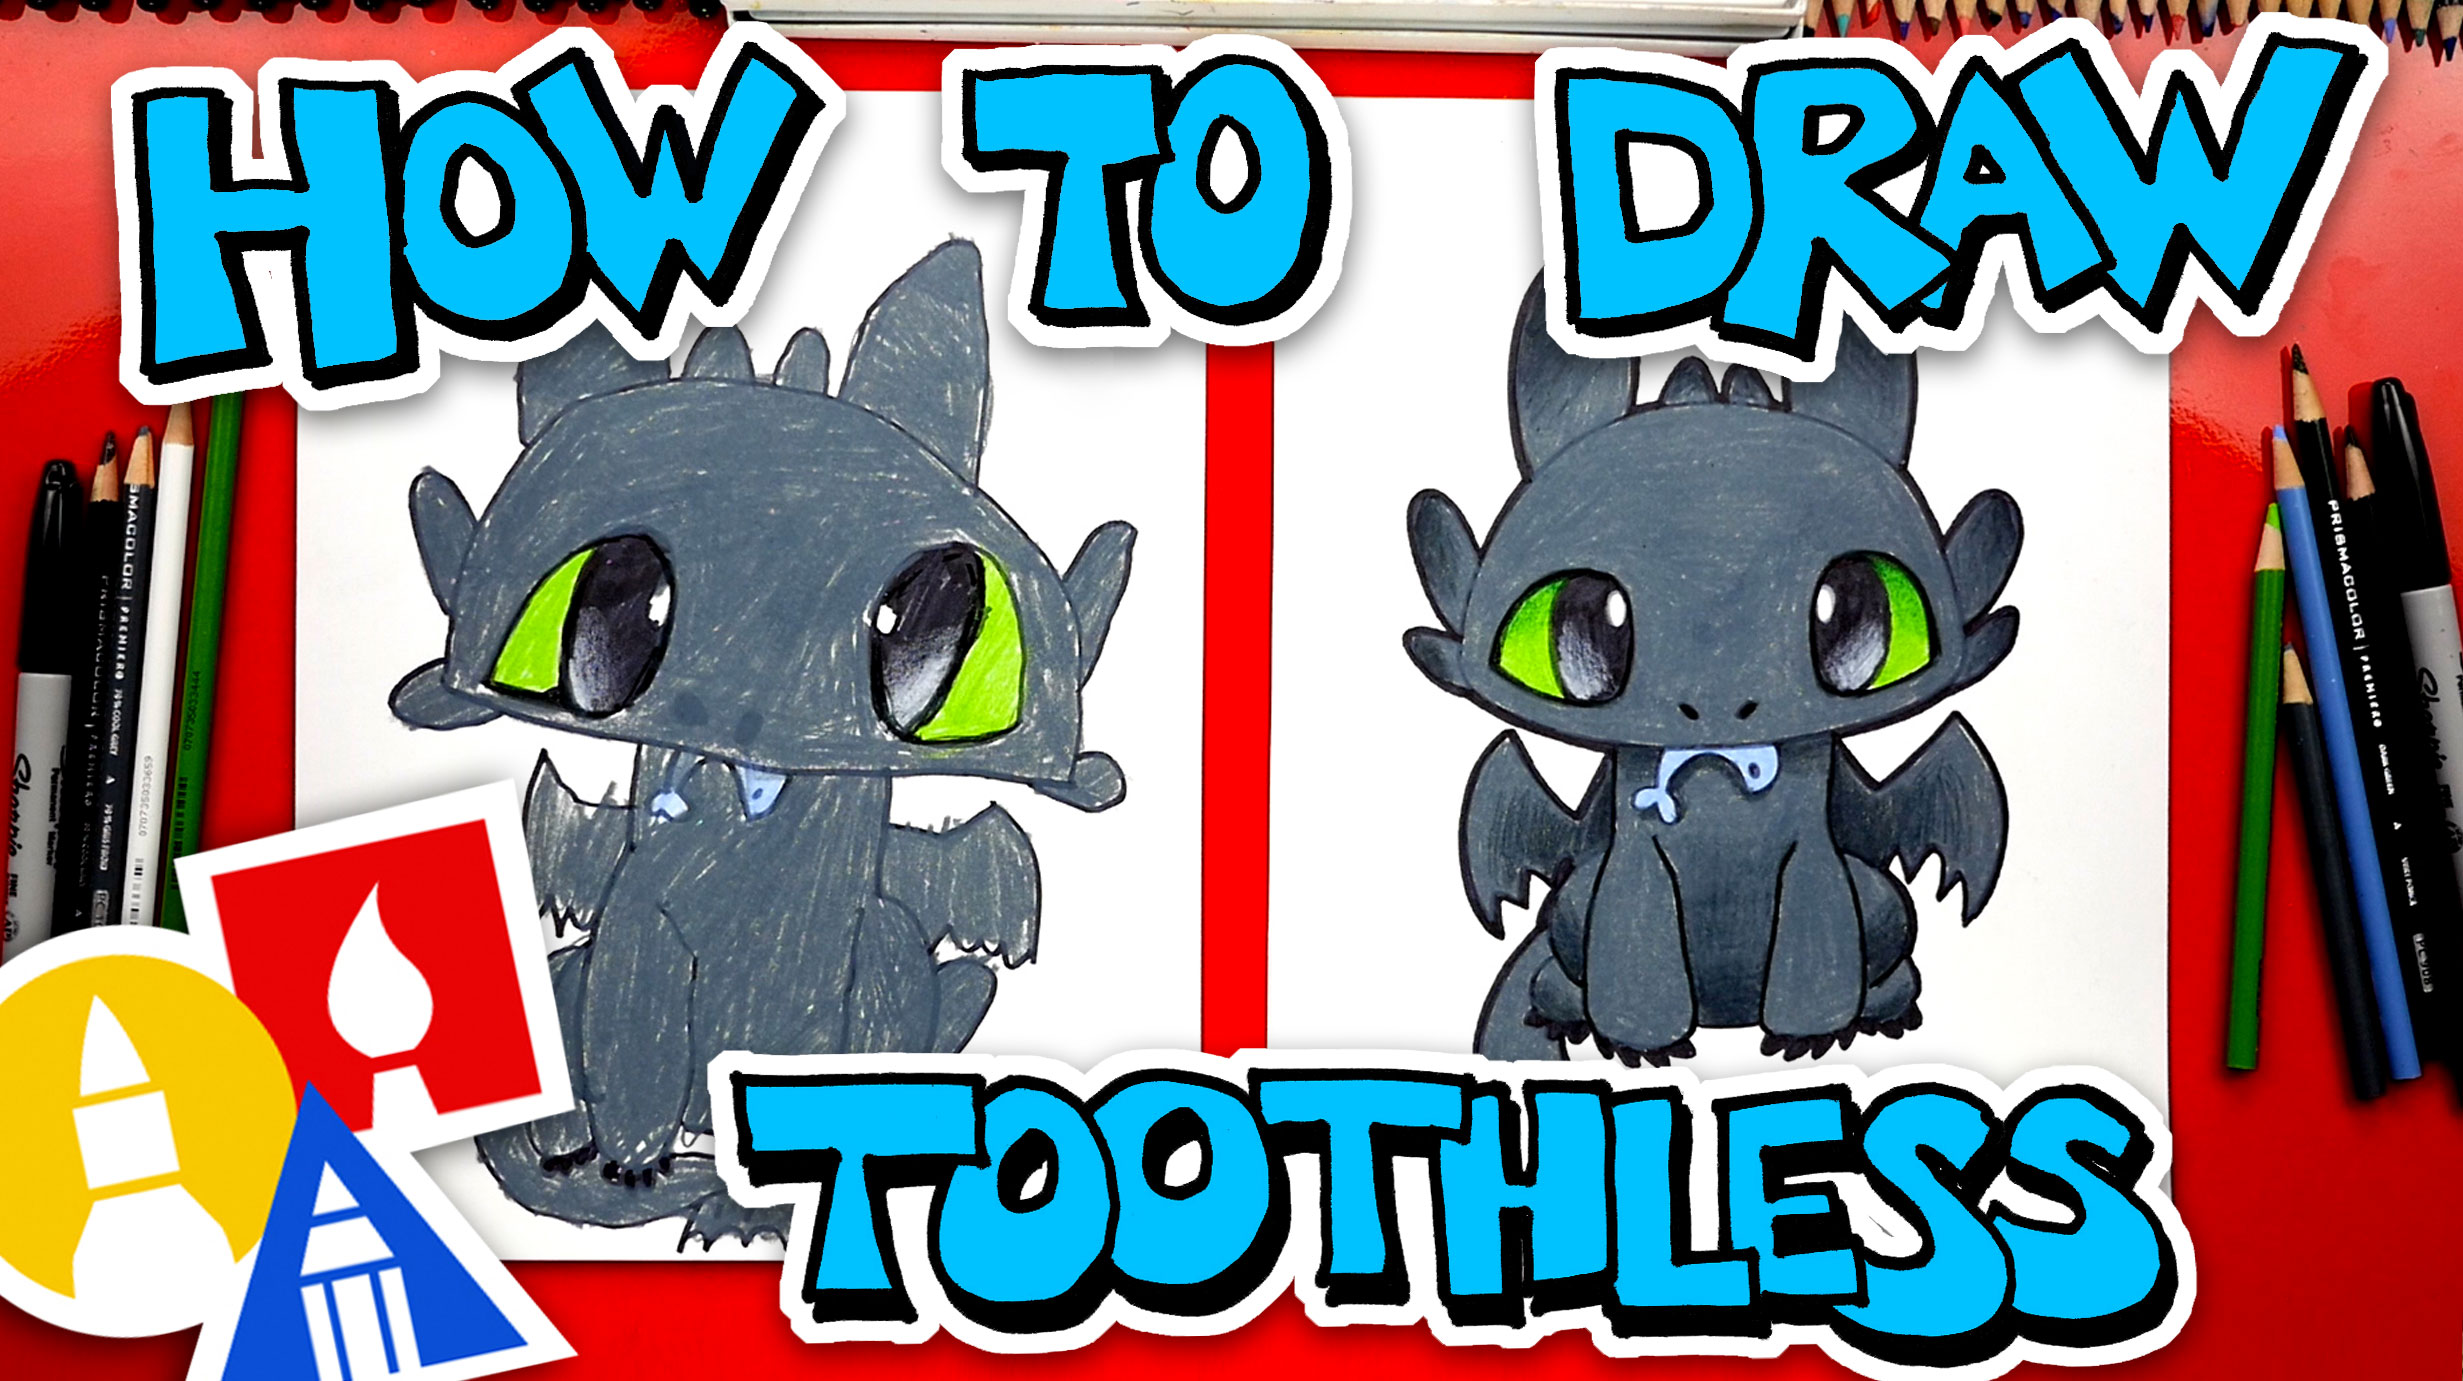 How To Draw Toothless From How To Train Your Dragon (Night Fury) - Art